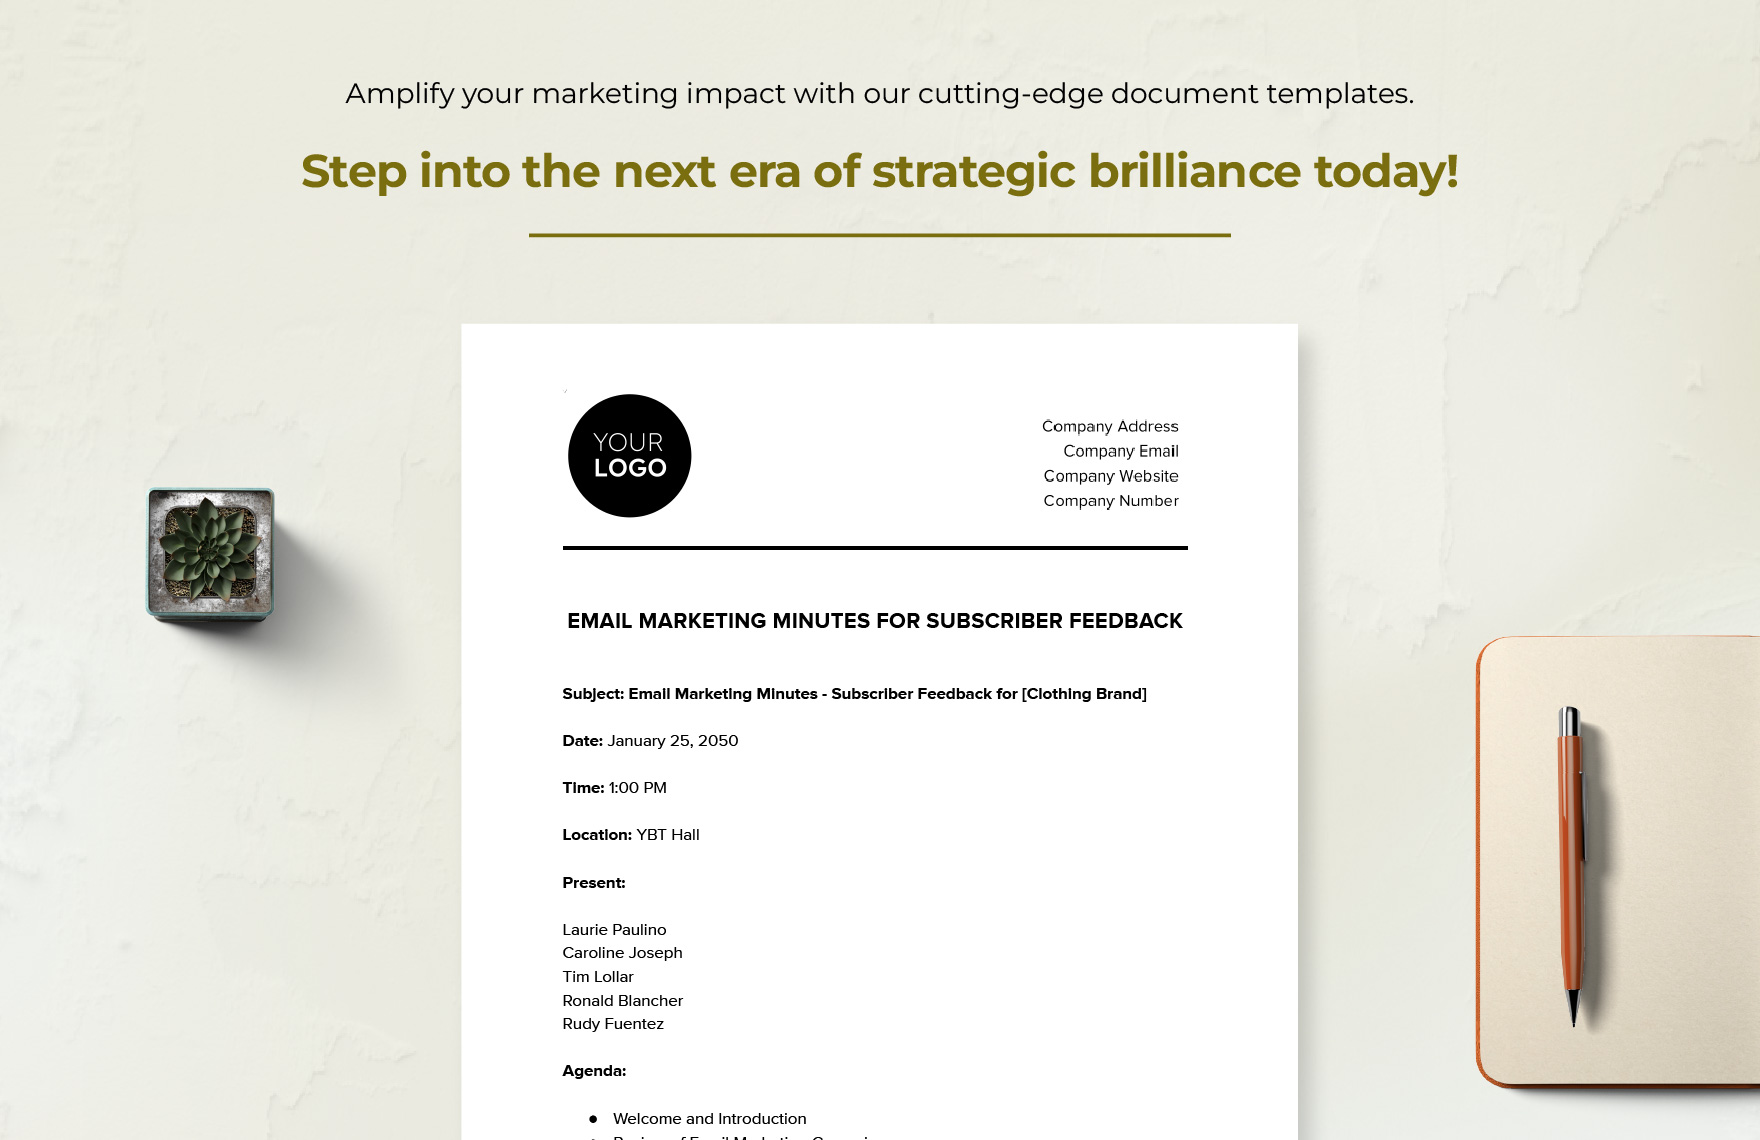 Email Marketing Minutes for Subscriber Feedback Template